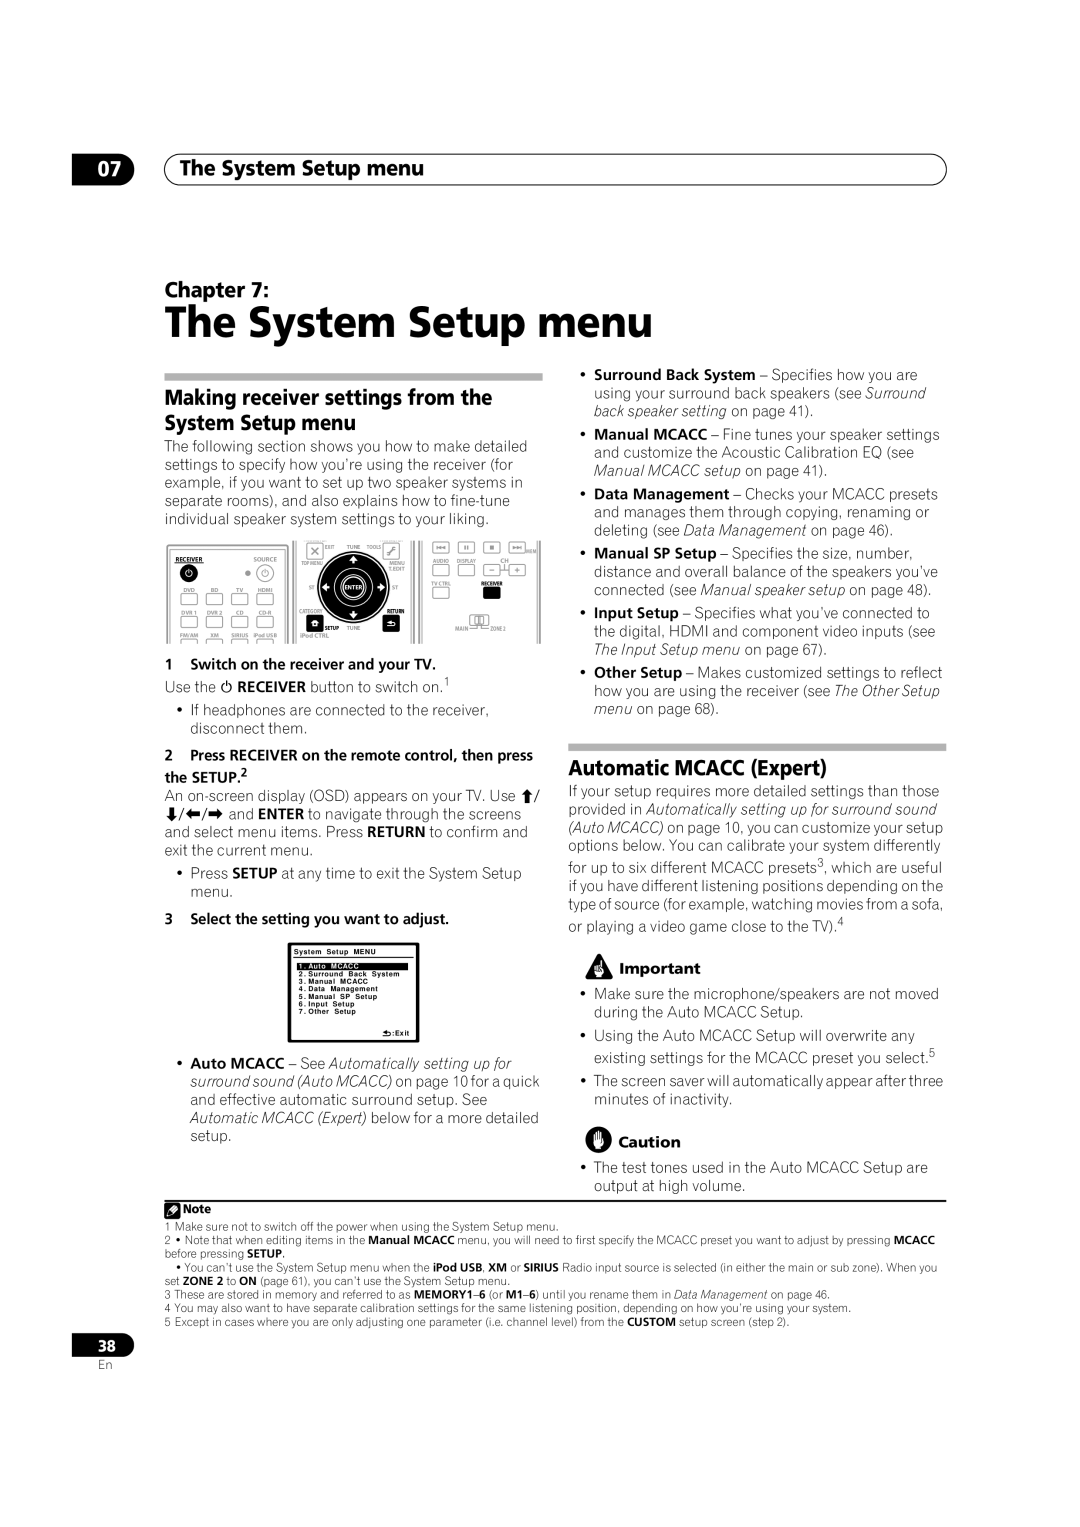 Pioneer VSX-1018AH-K 7 operating instructions 07The System Setup menu Chapter, Automatic MCACC Expert 